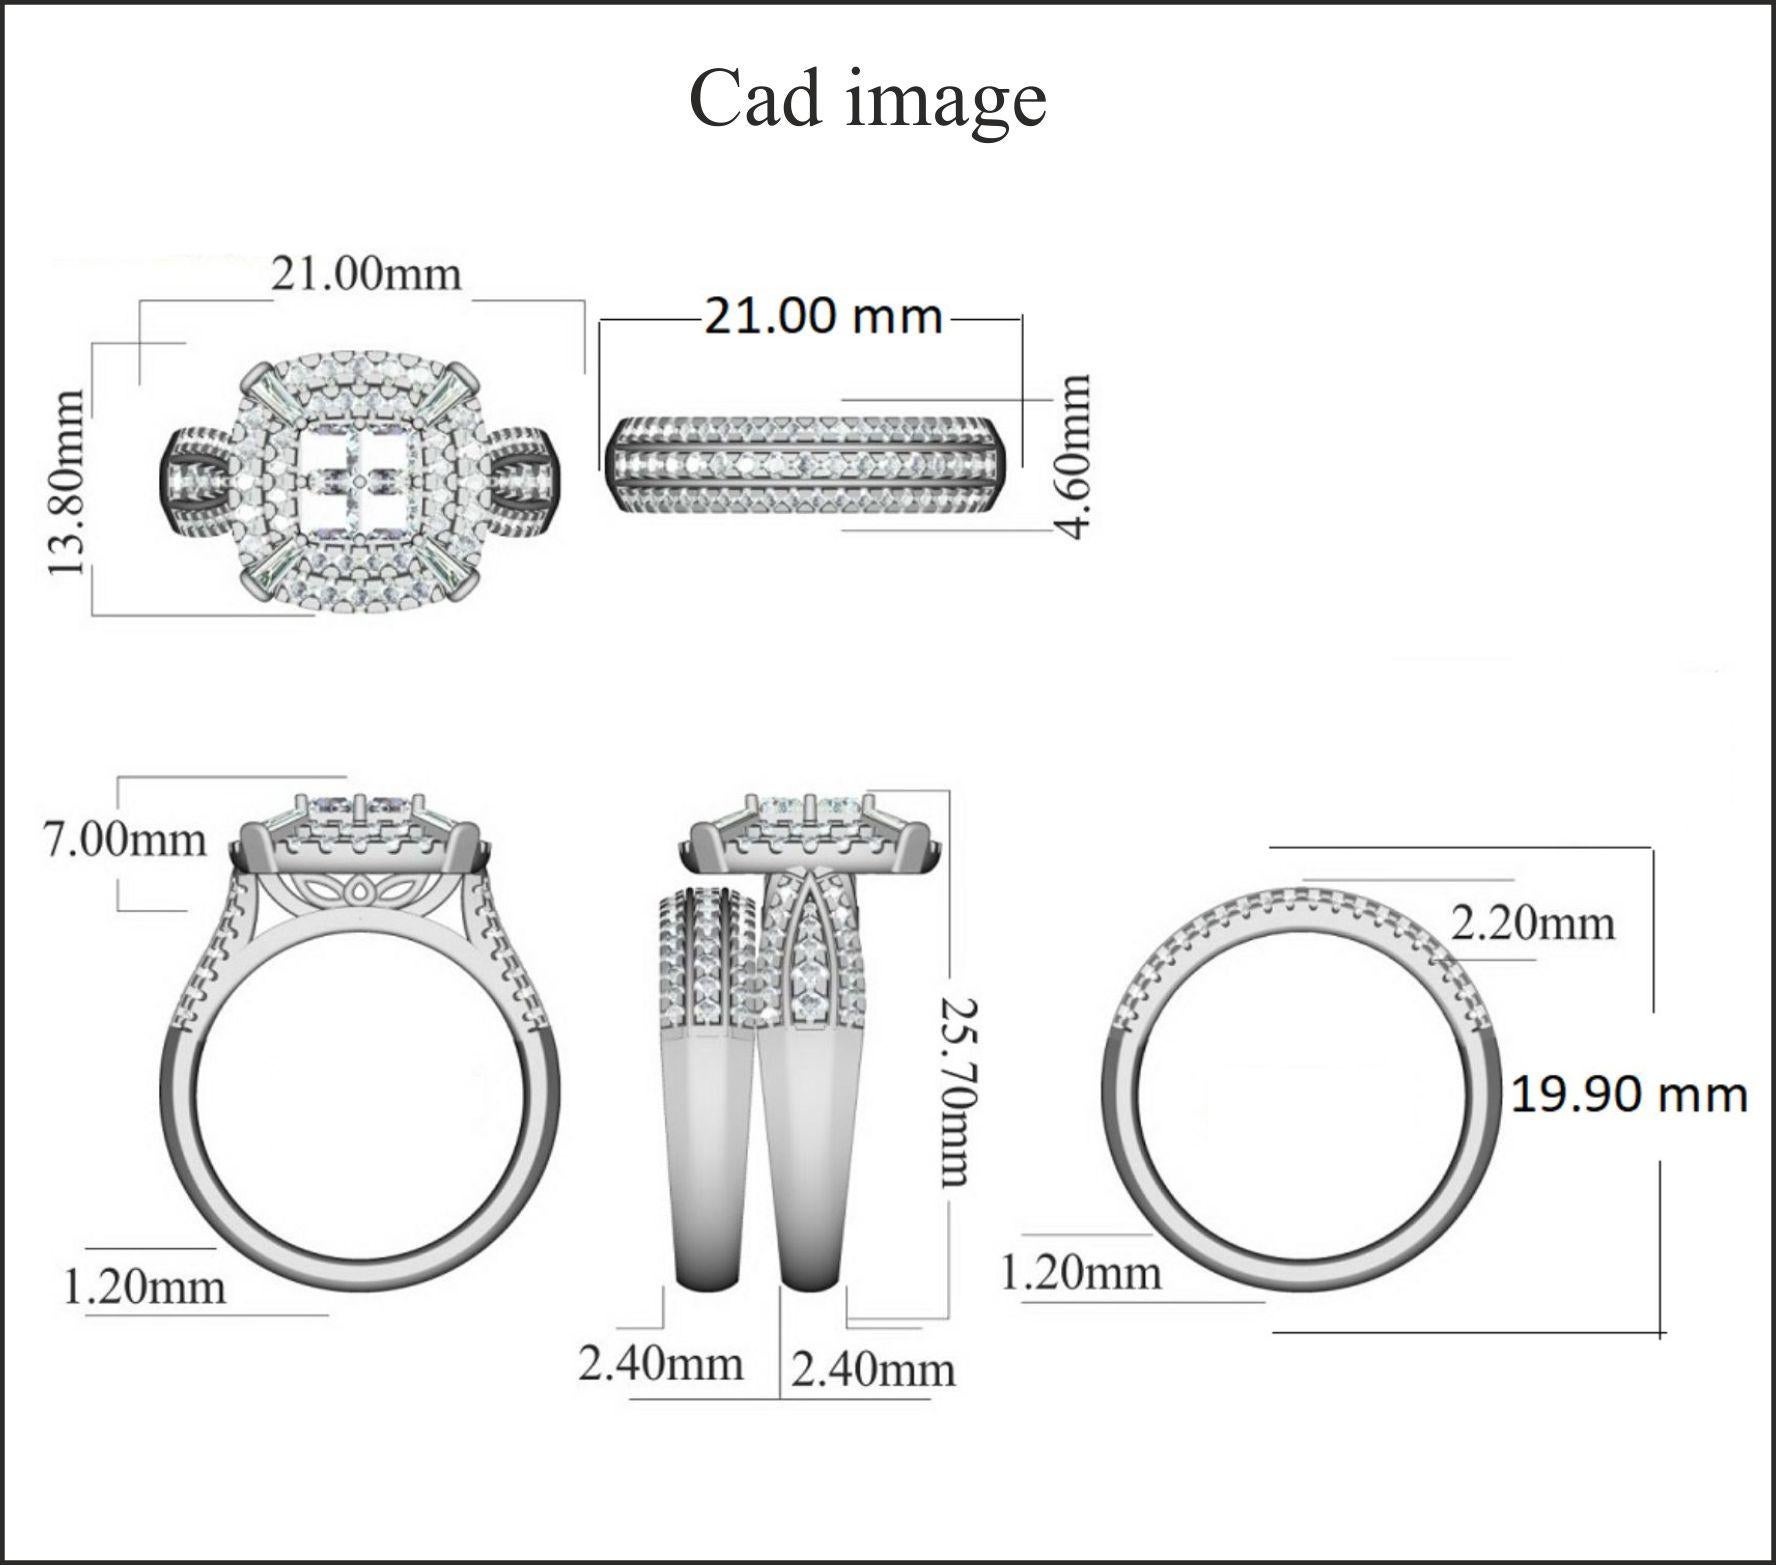 Truly exquisite diamond bridal set ring is sure to be admired for the inherent classic beauty and elegance within its design. The total weight of diamonds 2.00 carat, H-I color, I2 Clarity and studded with 131 round brilliant, 4 baguette and 4